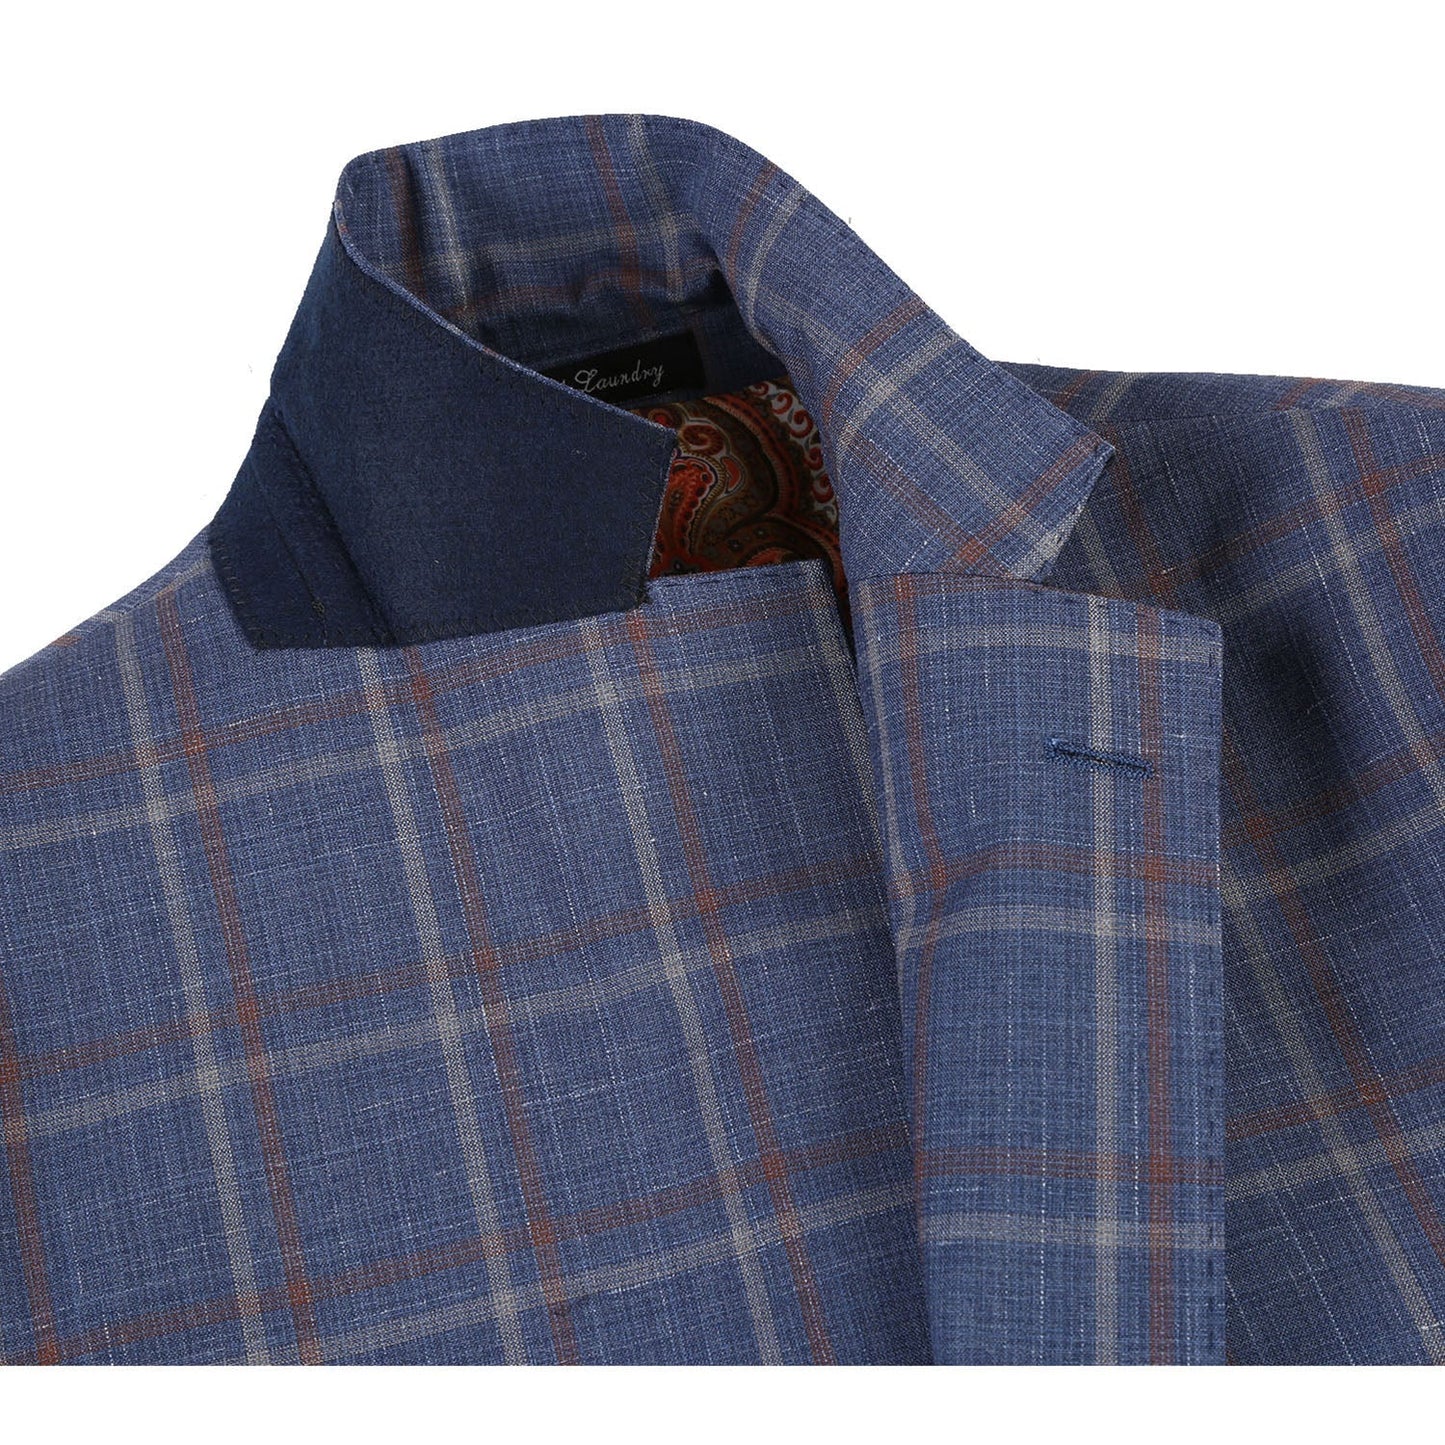 EL72-62-400 Slim Fit English Laundry Light Steel Blue with Orange Check Wool Suit